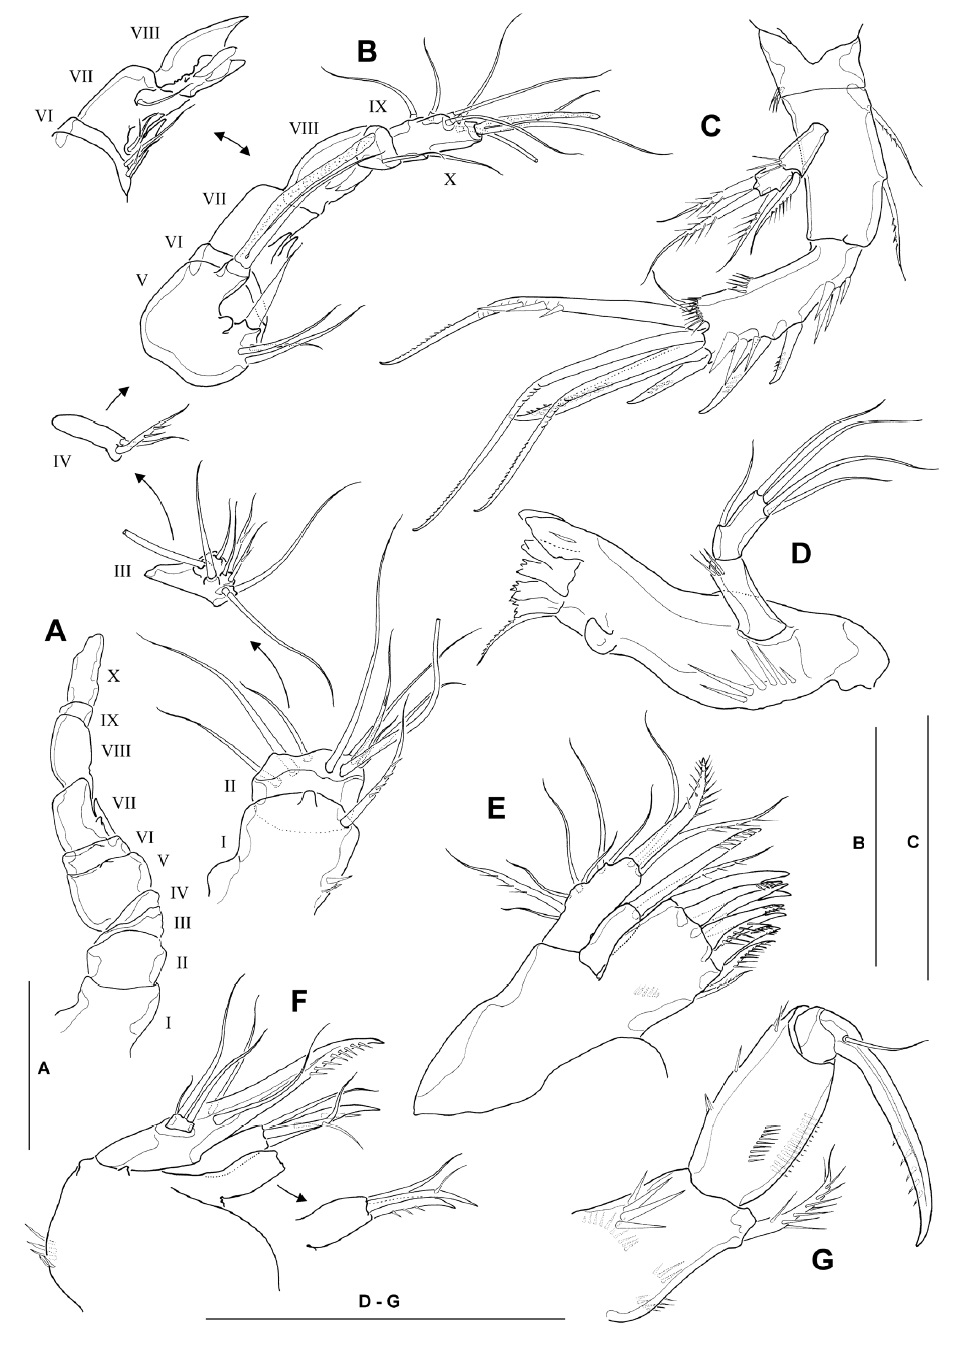 Bryocamptus jejuensis, male. A, Antennular segmentation; B, Antennule shown disarticulated to reveal detailed armature on individual segments; C, Antenna; D, Mandible; E, Maxillule; F, Maxilla (inset showing armature of proximal endite of syncoxa); G, maxilliped. Scale bars: A-G=0.05 mm.